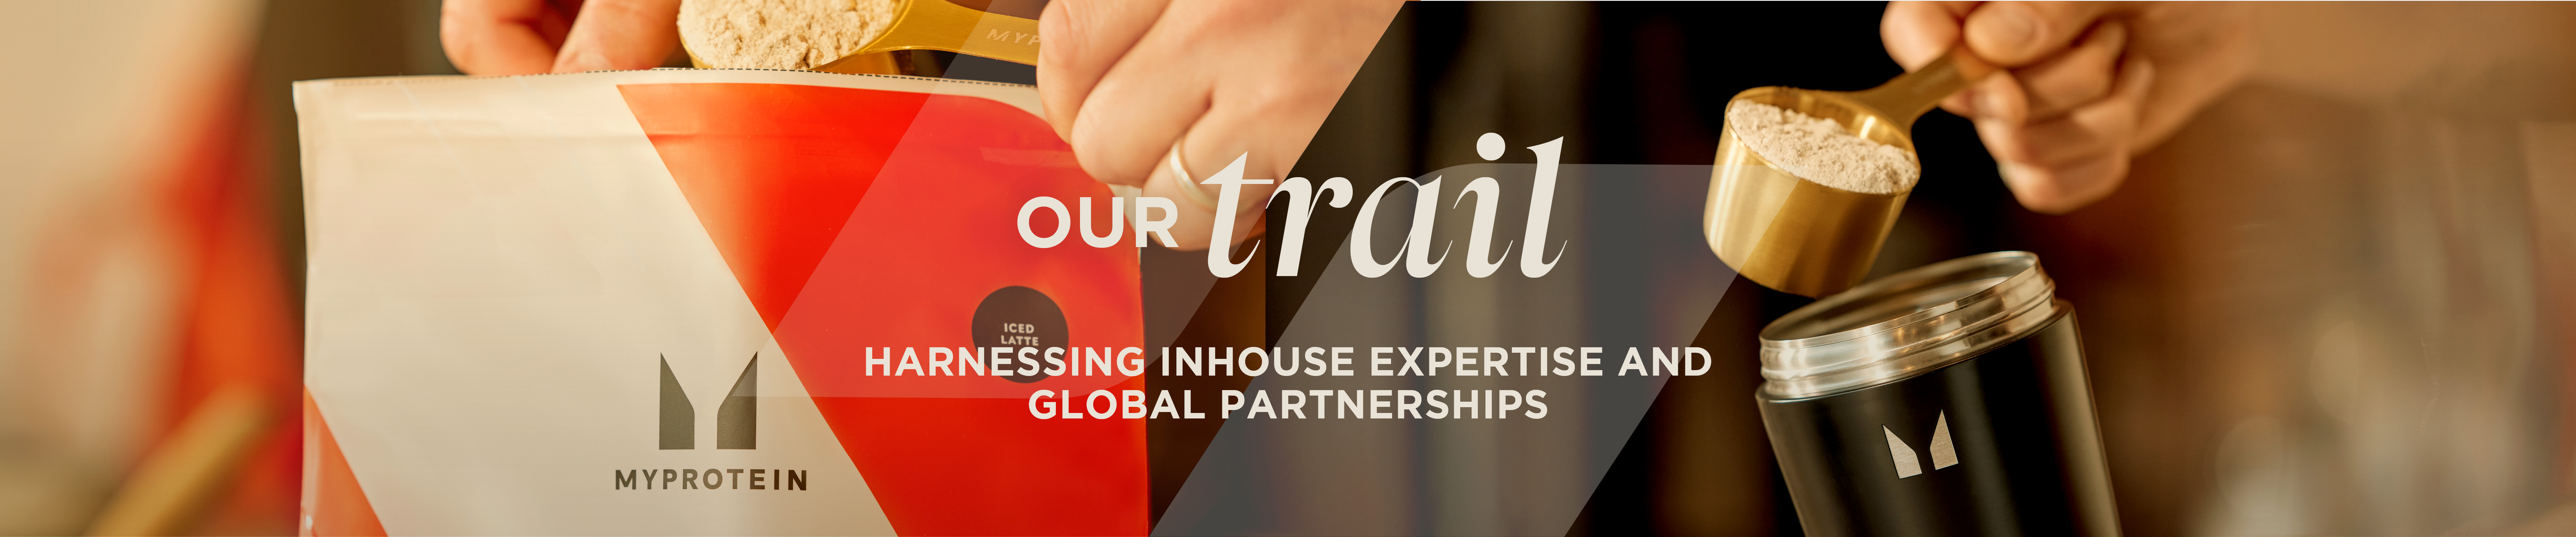 Our trail, harnessing inhouse expertise and global partnerships